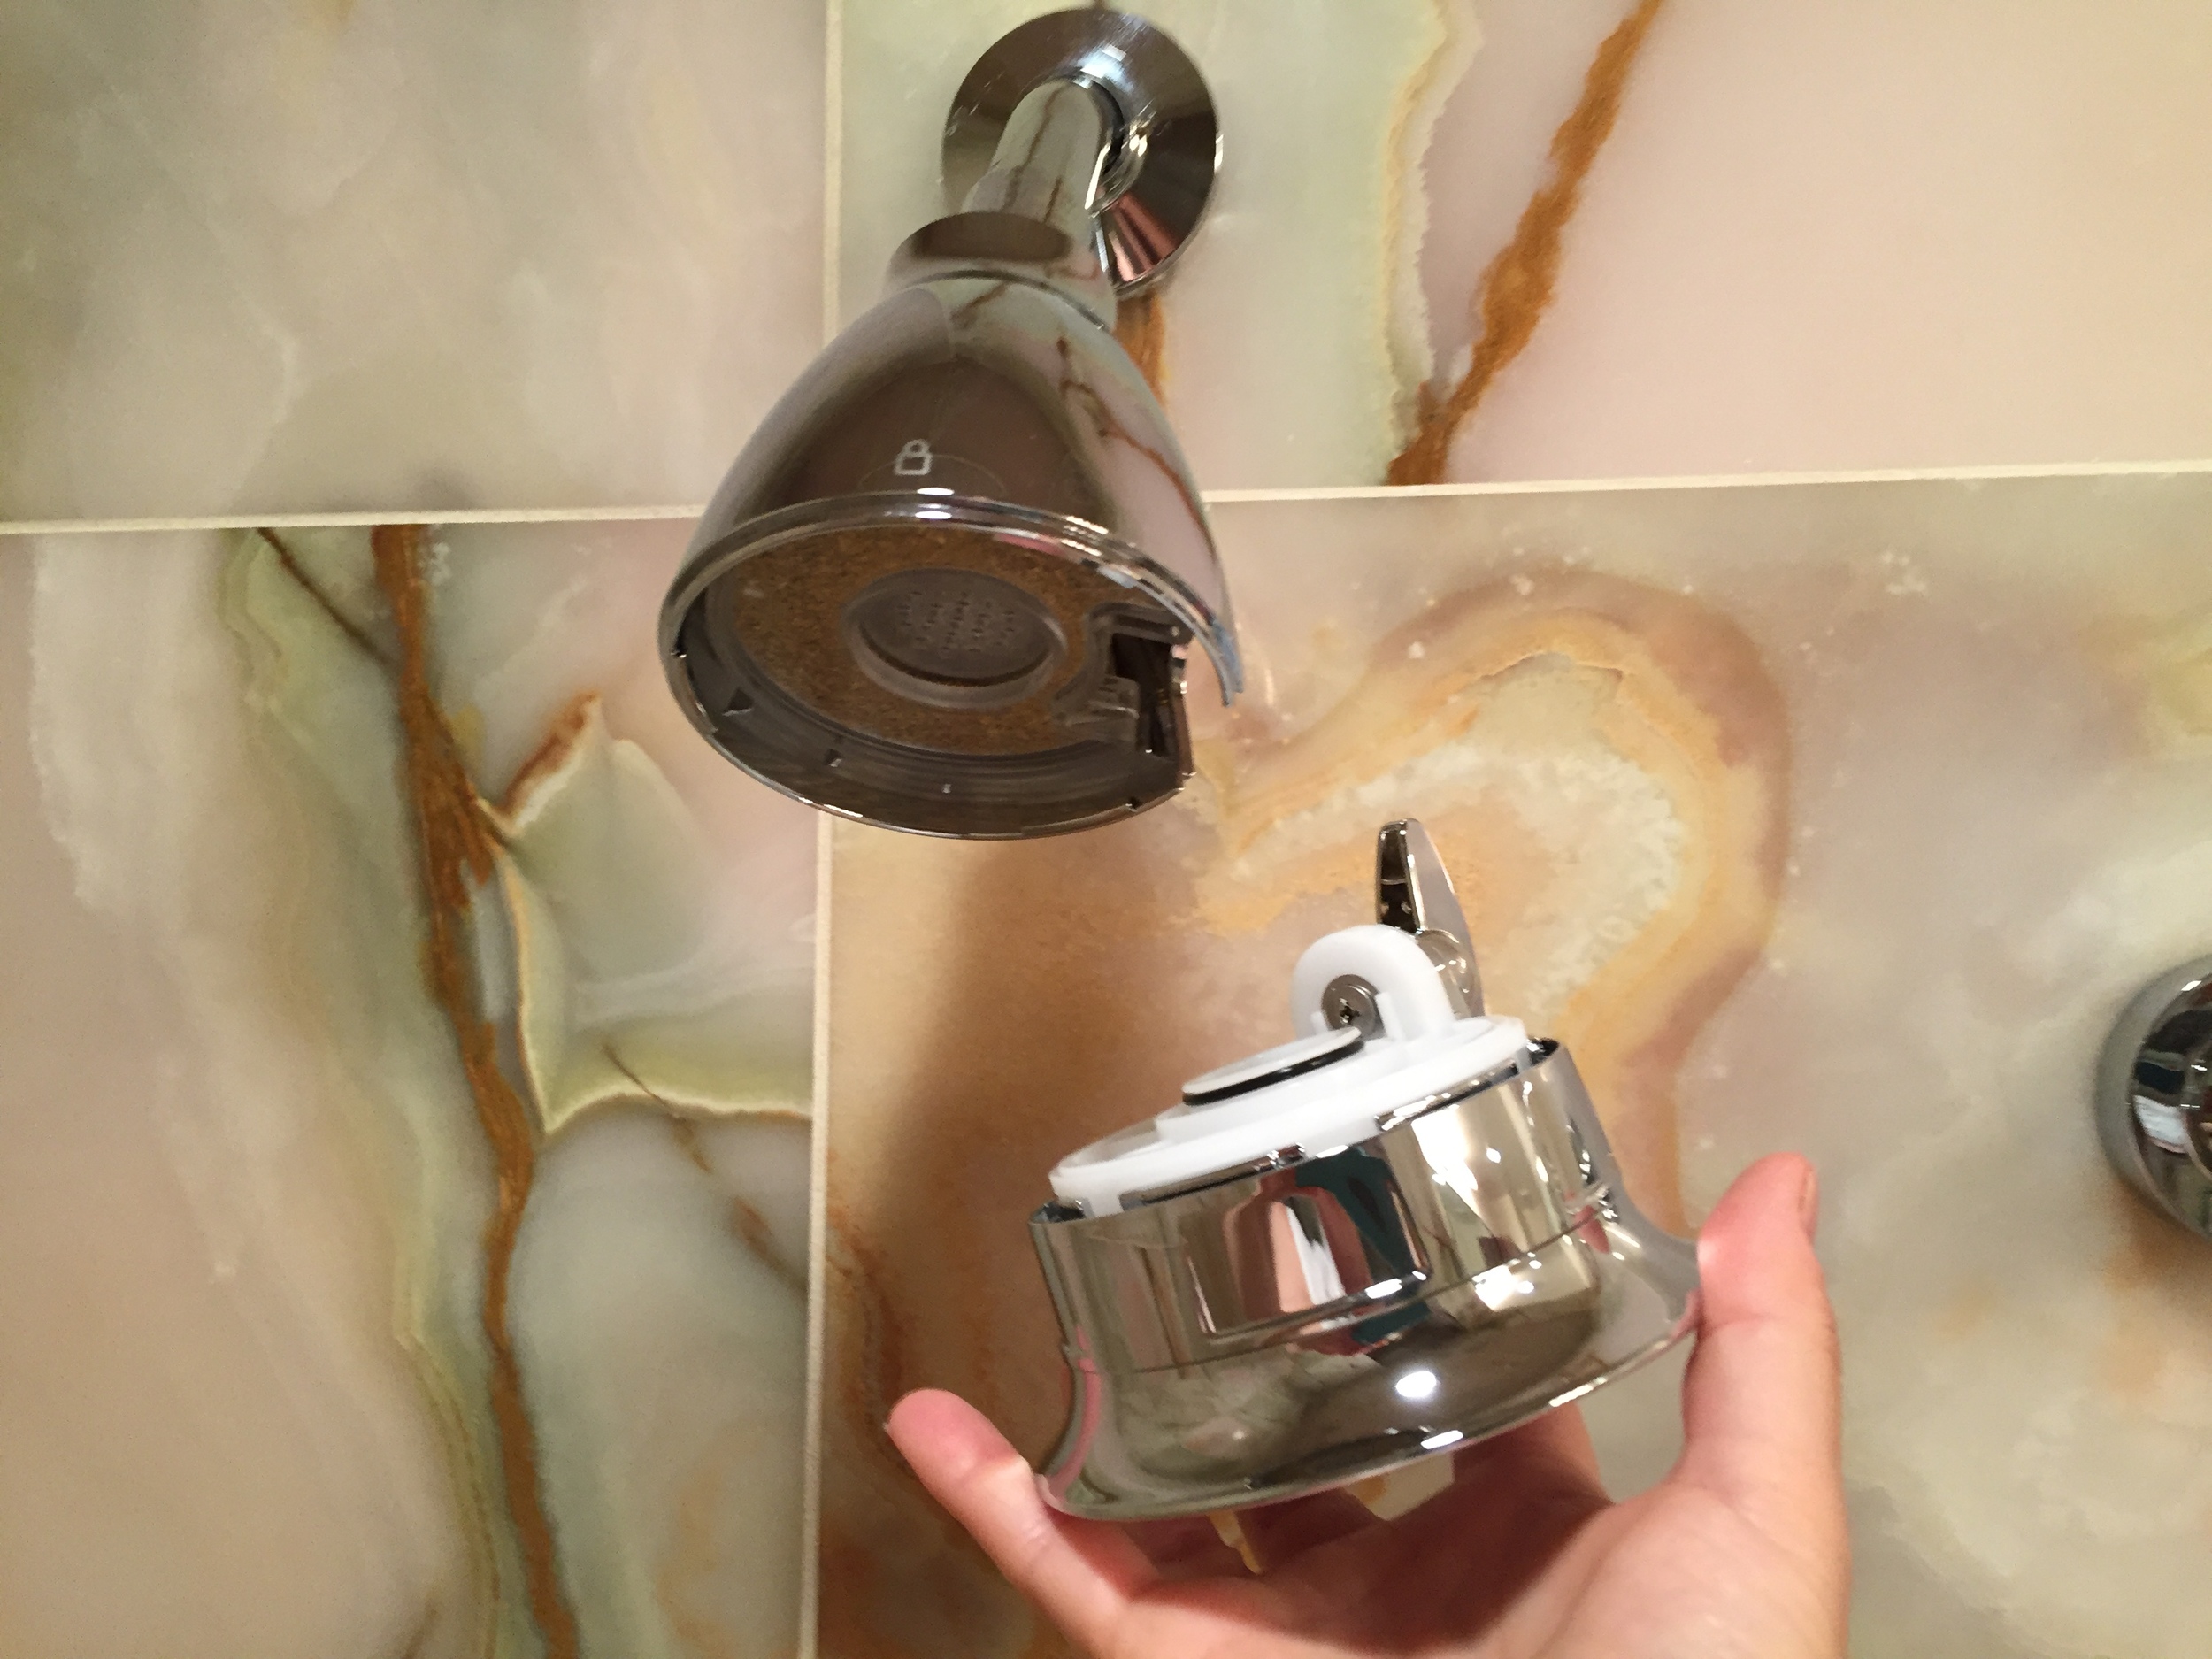 Unlock the bottom section on Speakman's Hotel Pure shower head to remove and replace the filter cartridge